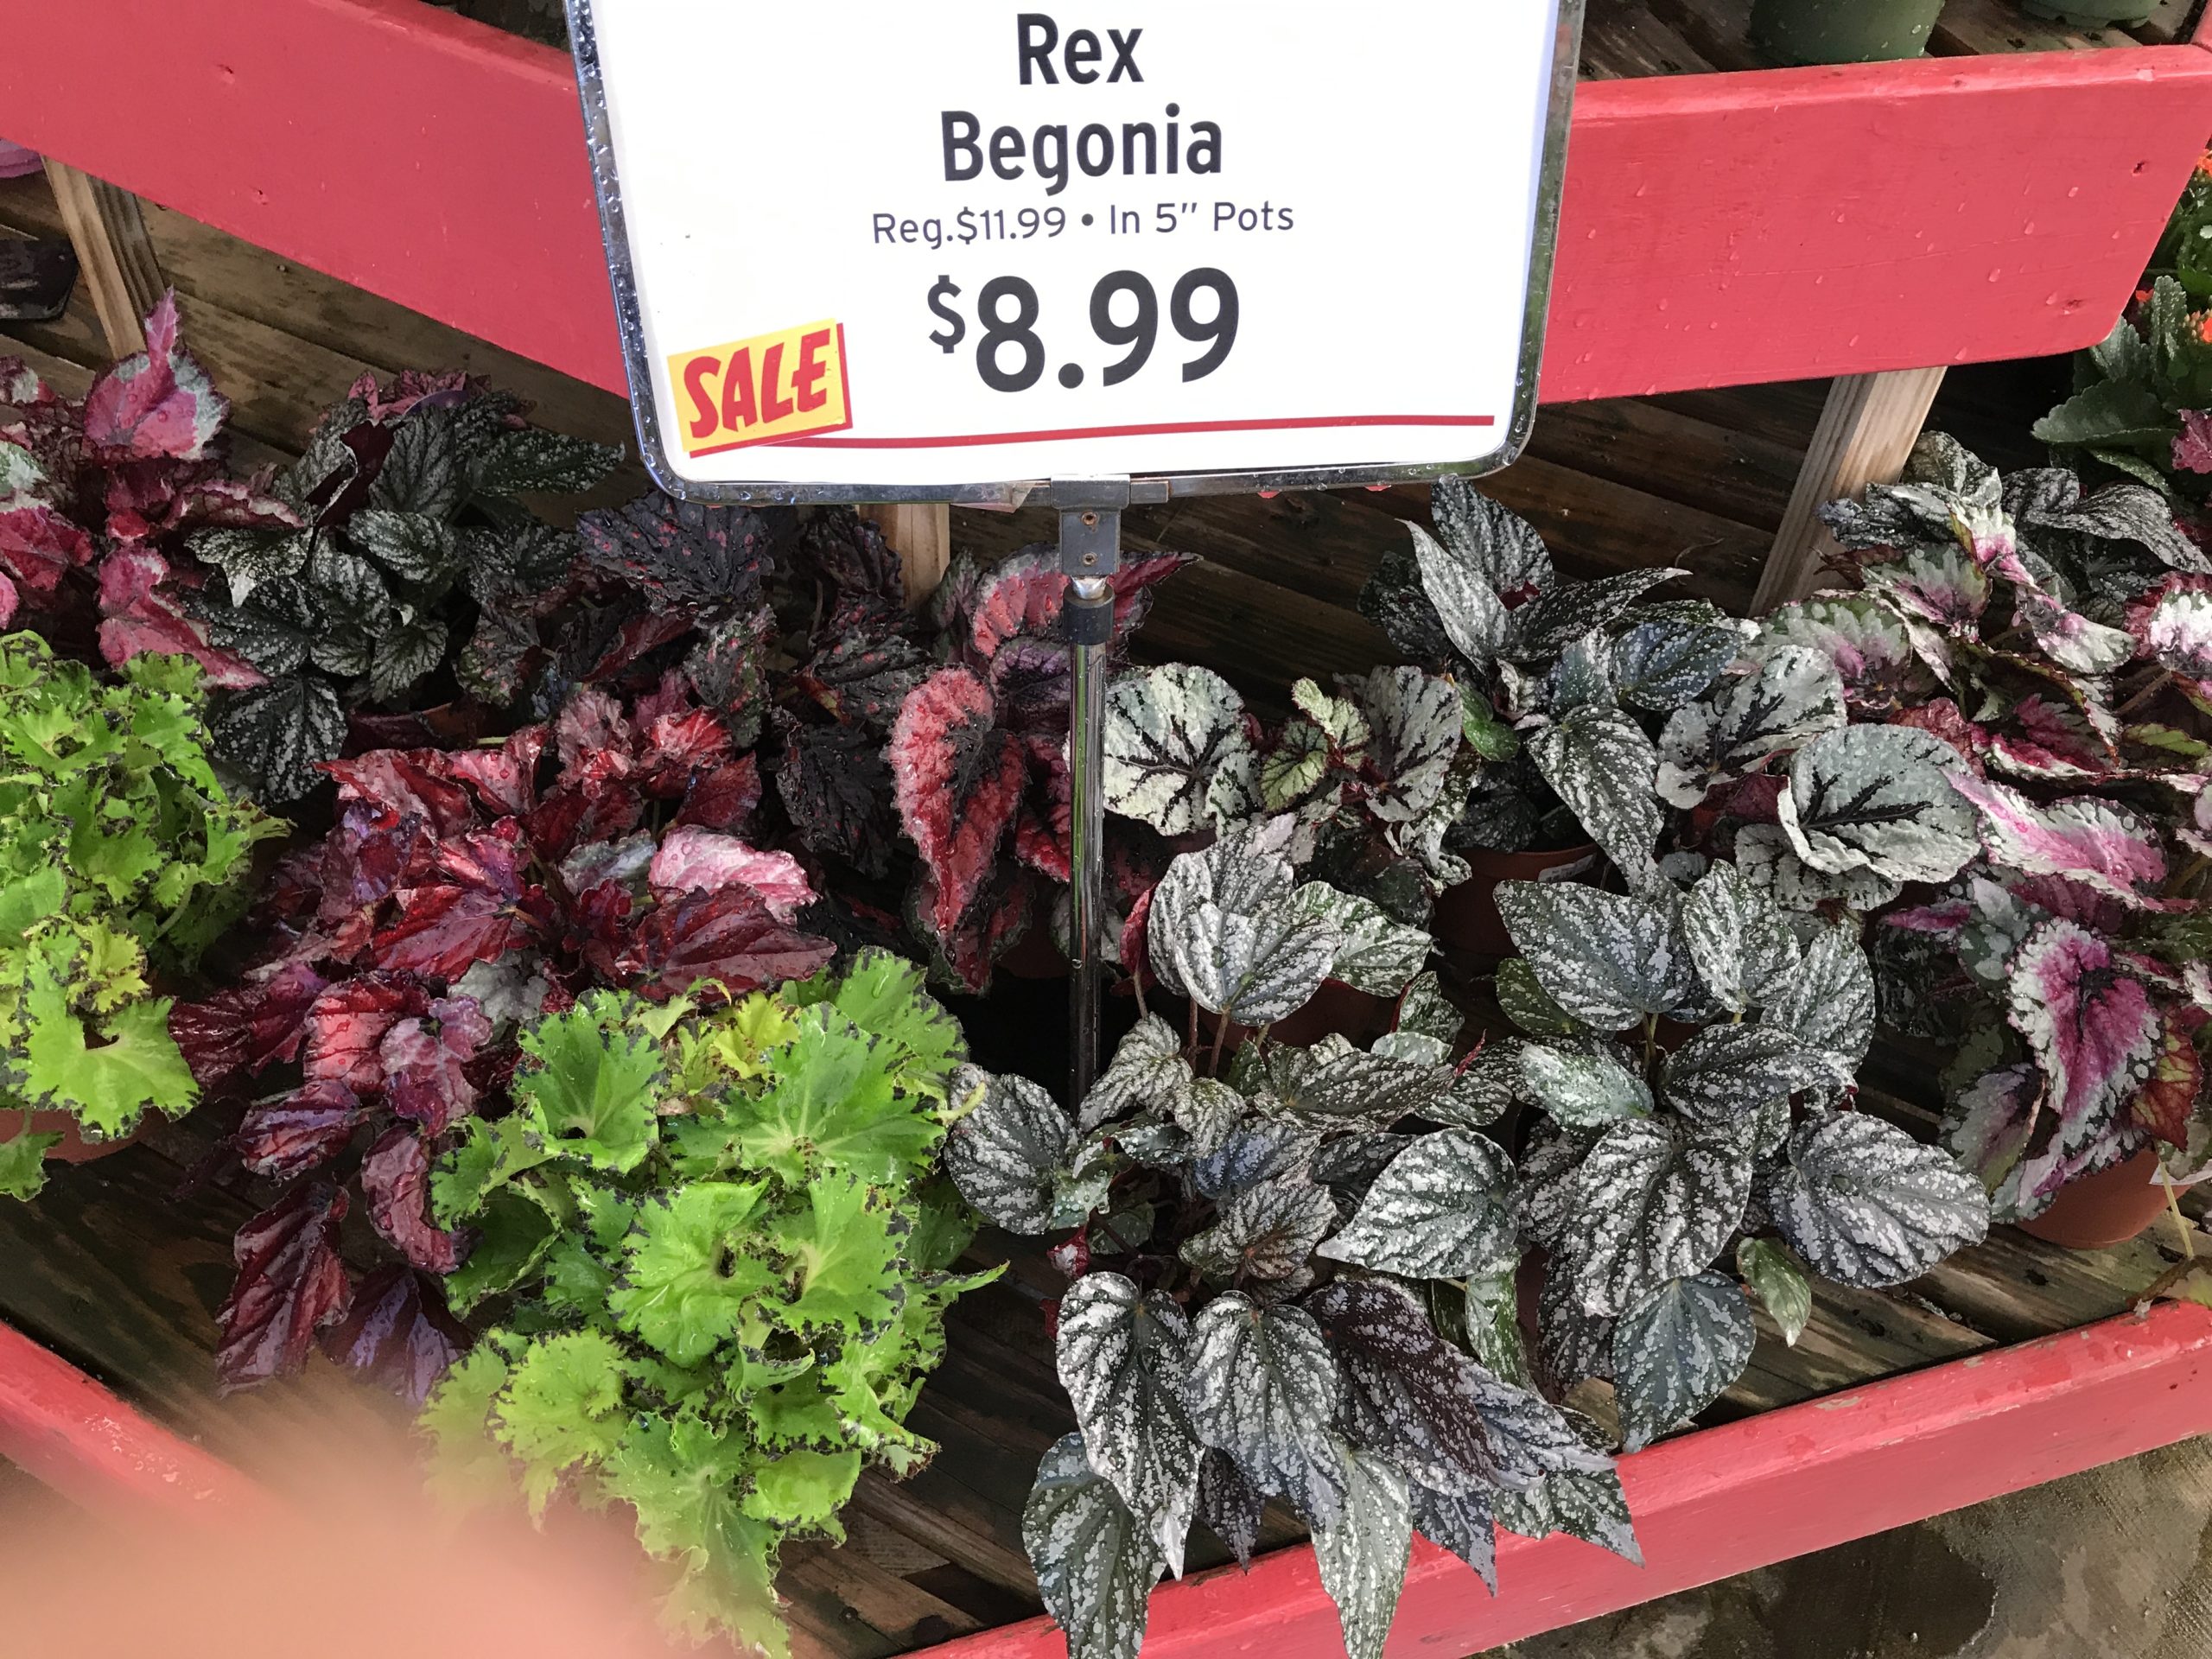 Rex Begonias on sale in 5-inch pots. Expect them to last about three years with annual repotting.